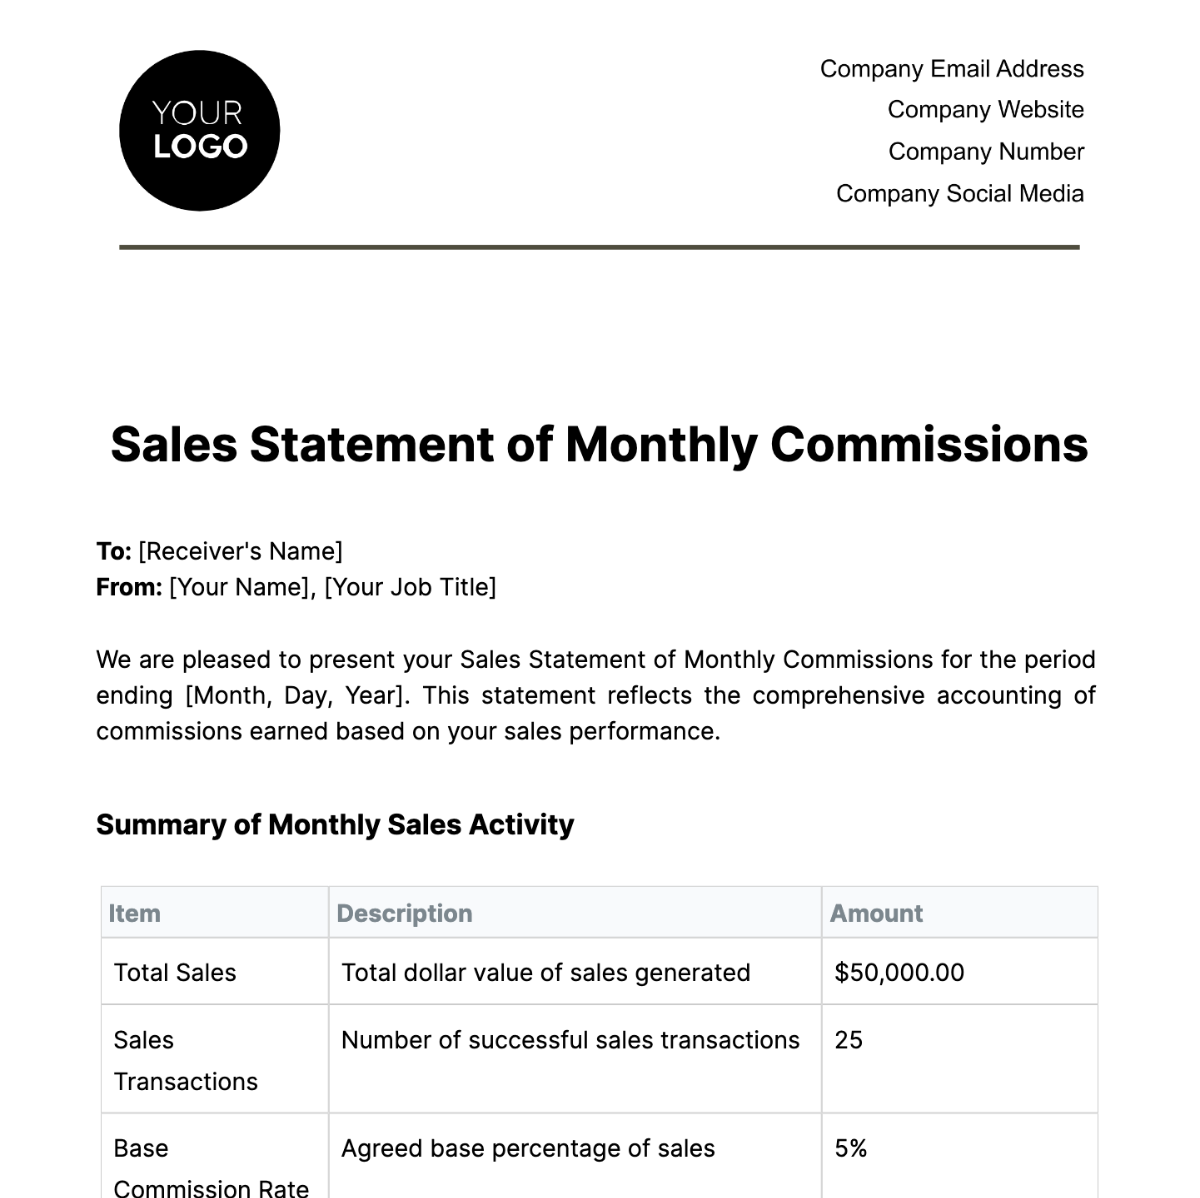 Sales Statement of Monthly Commissions Template